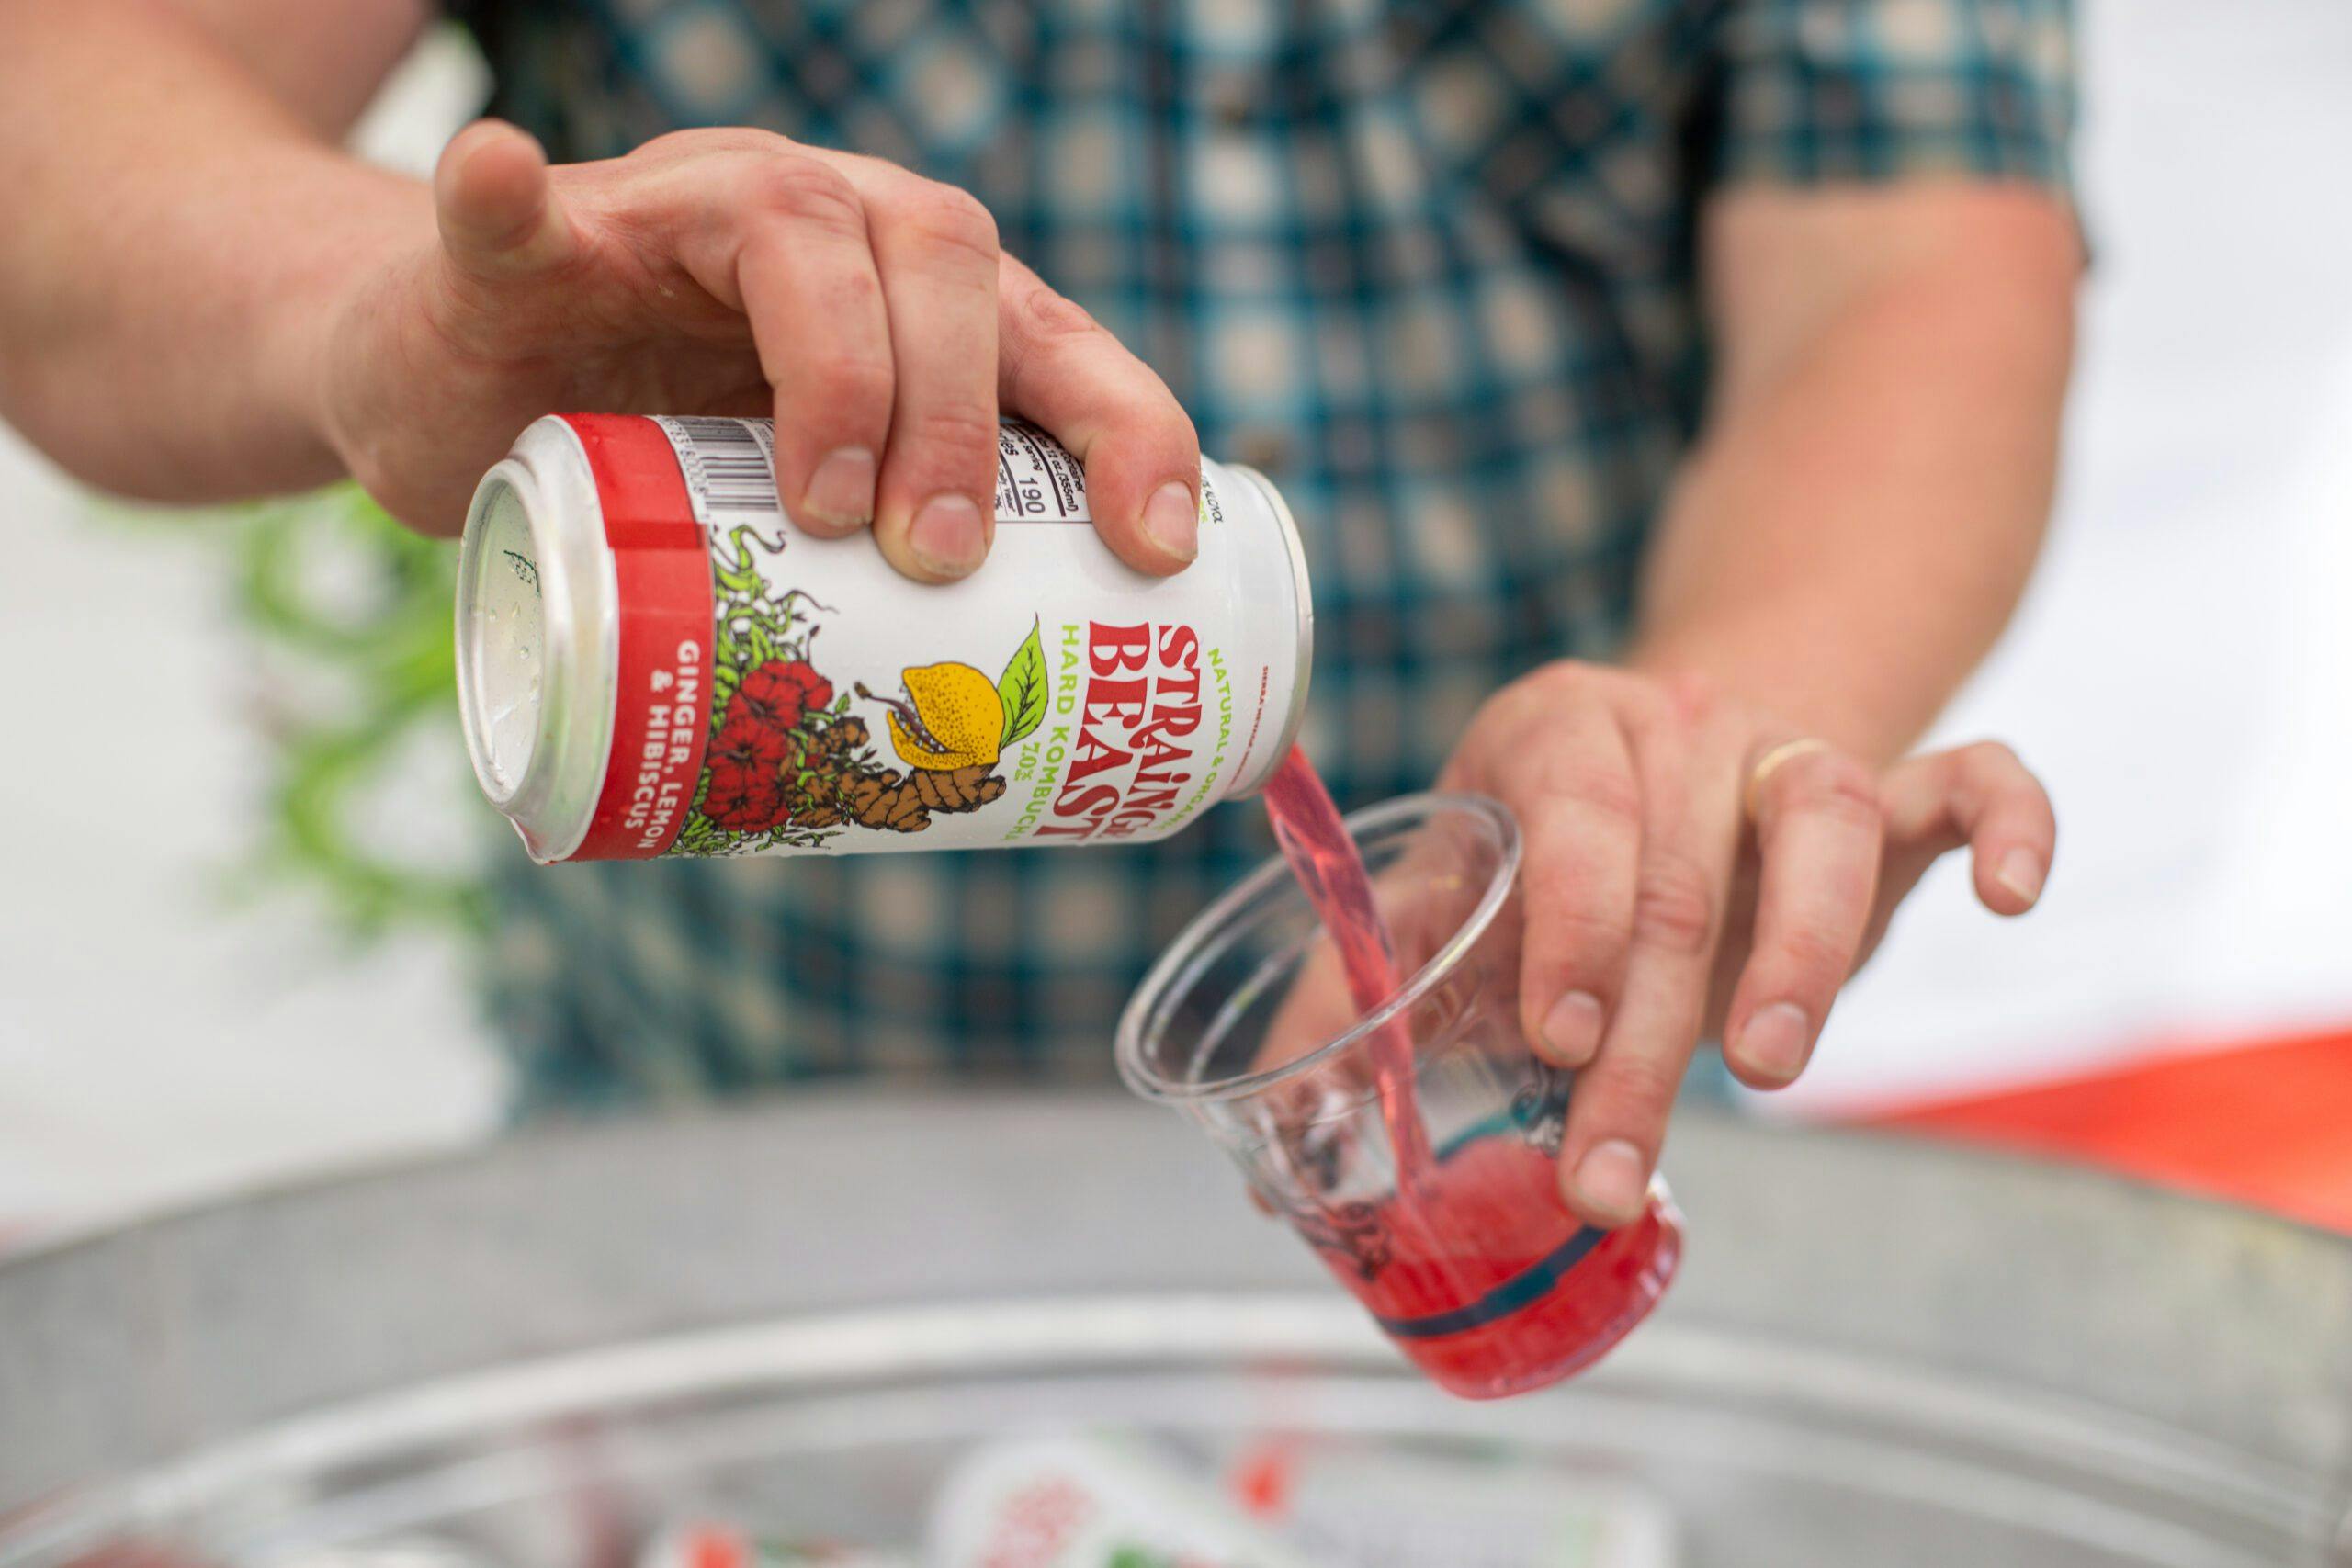 A person pours a can of Strainge Beast Ginger, Lemon and Hibiscus kombucha into a glass